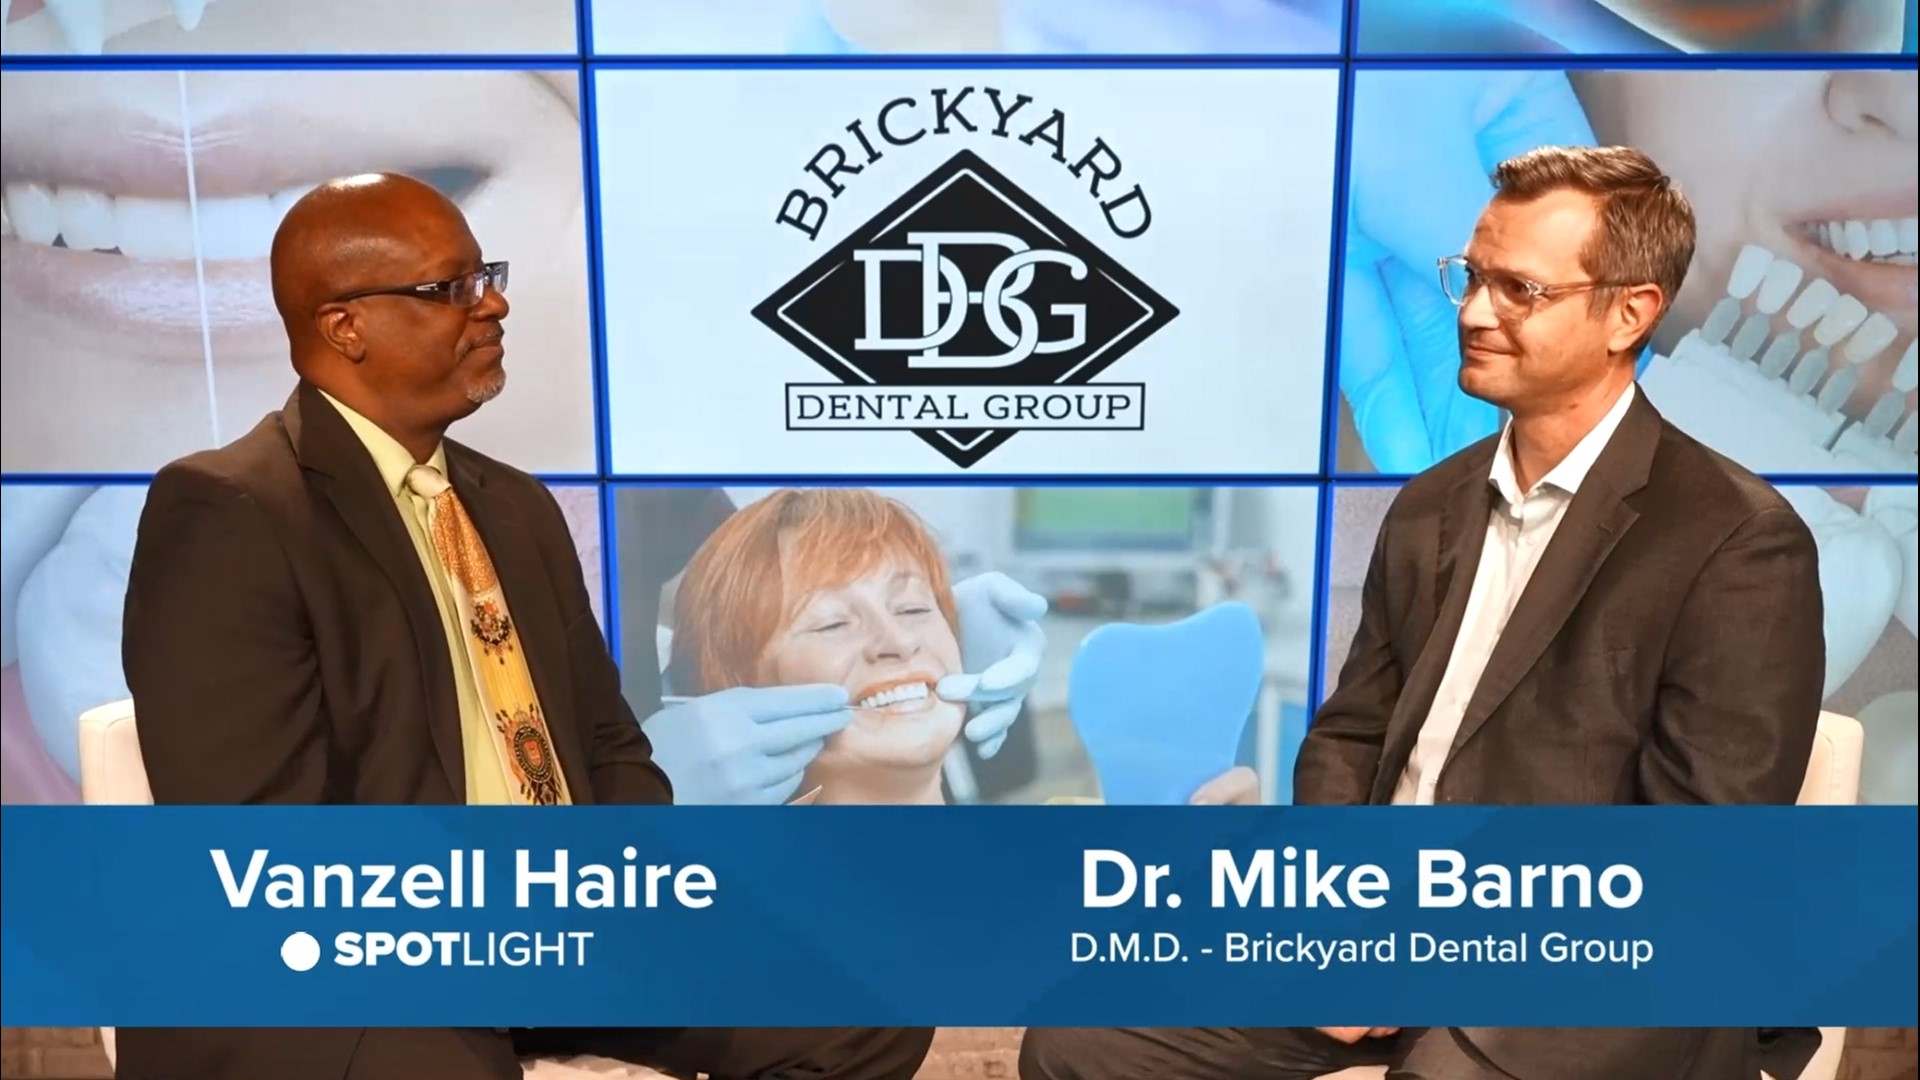 Learn how Brickyard Dental Group is unique in their approach to dental care